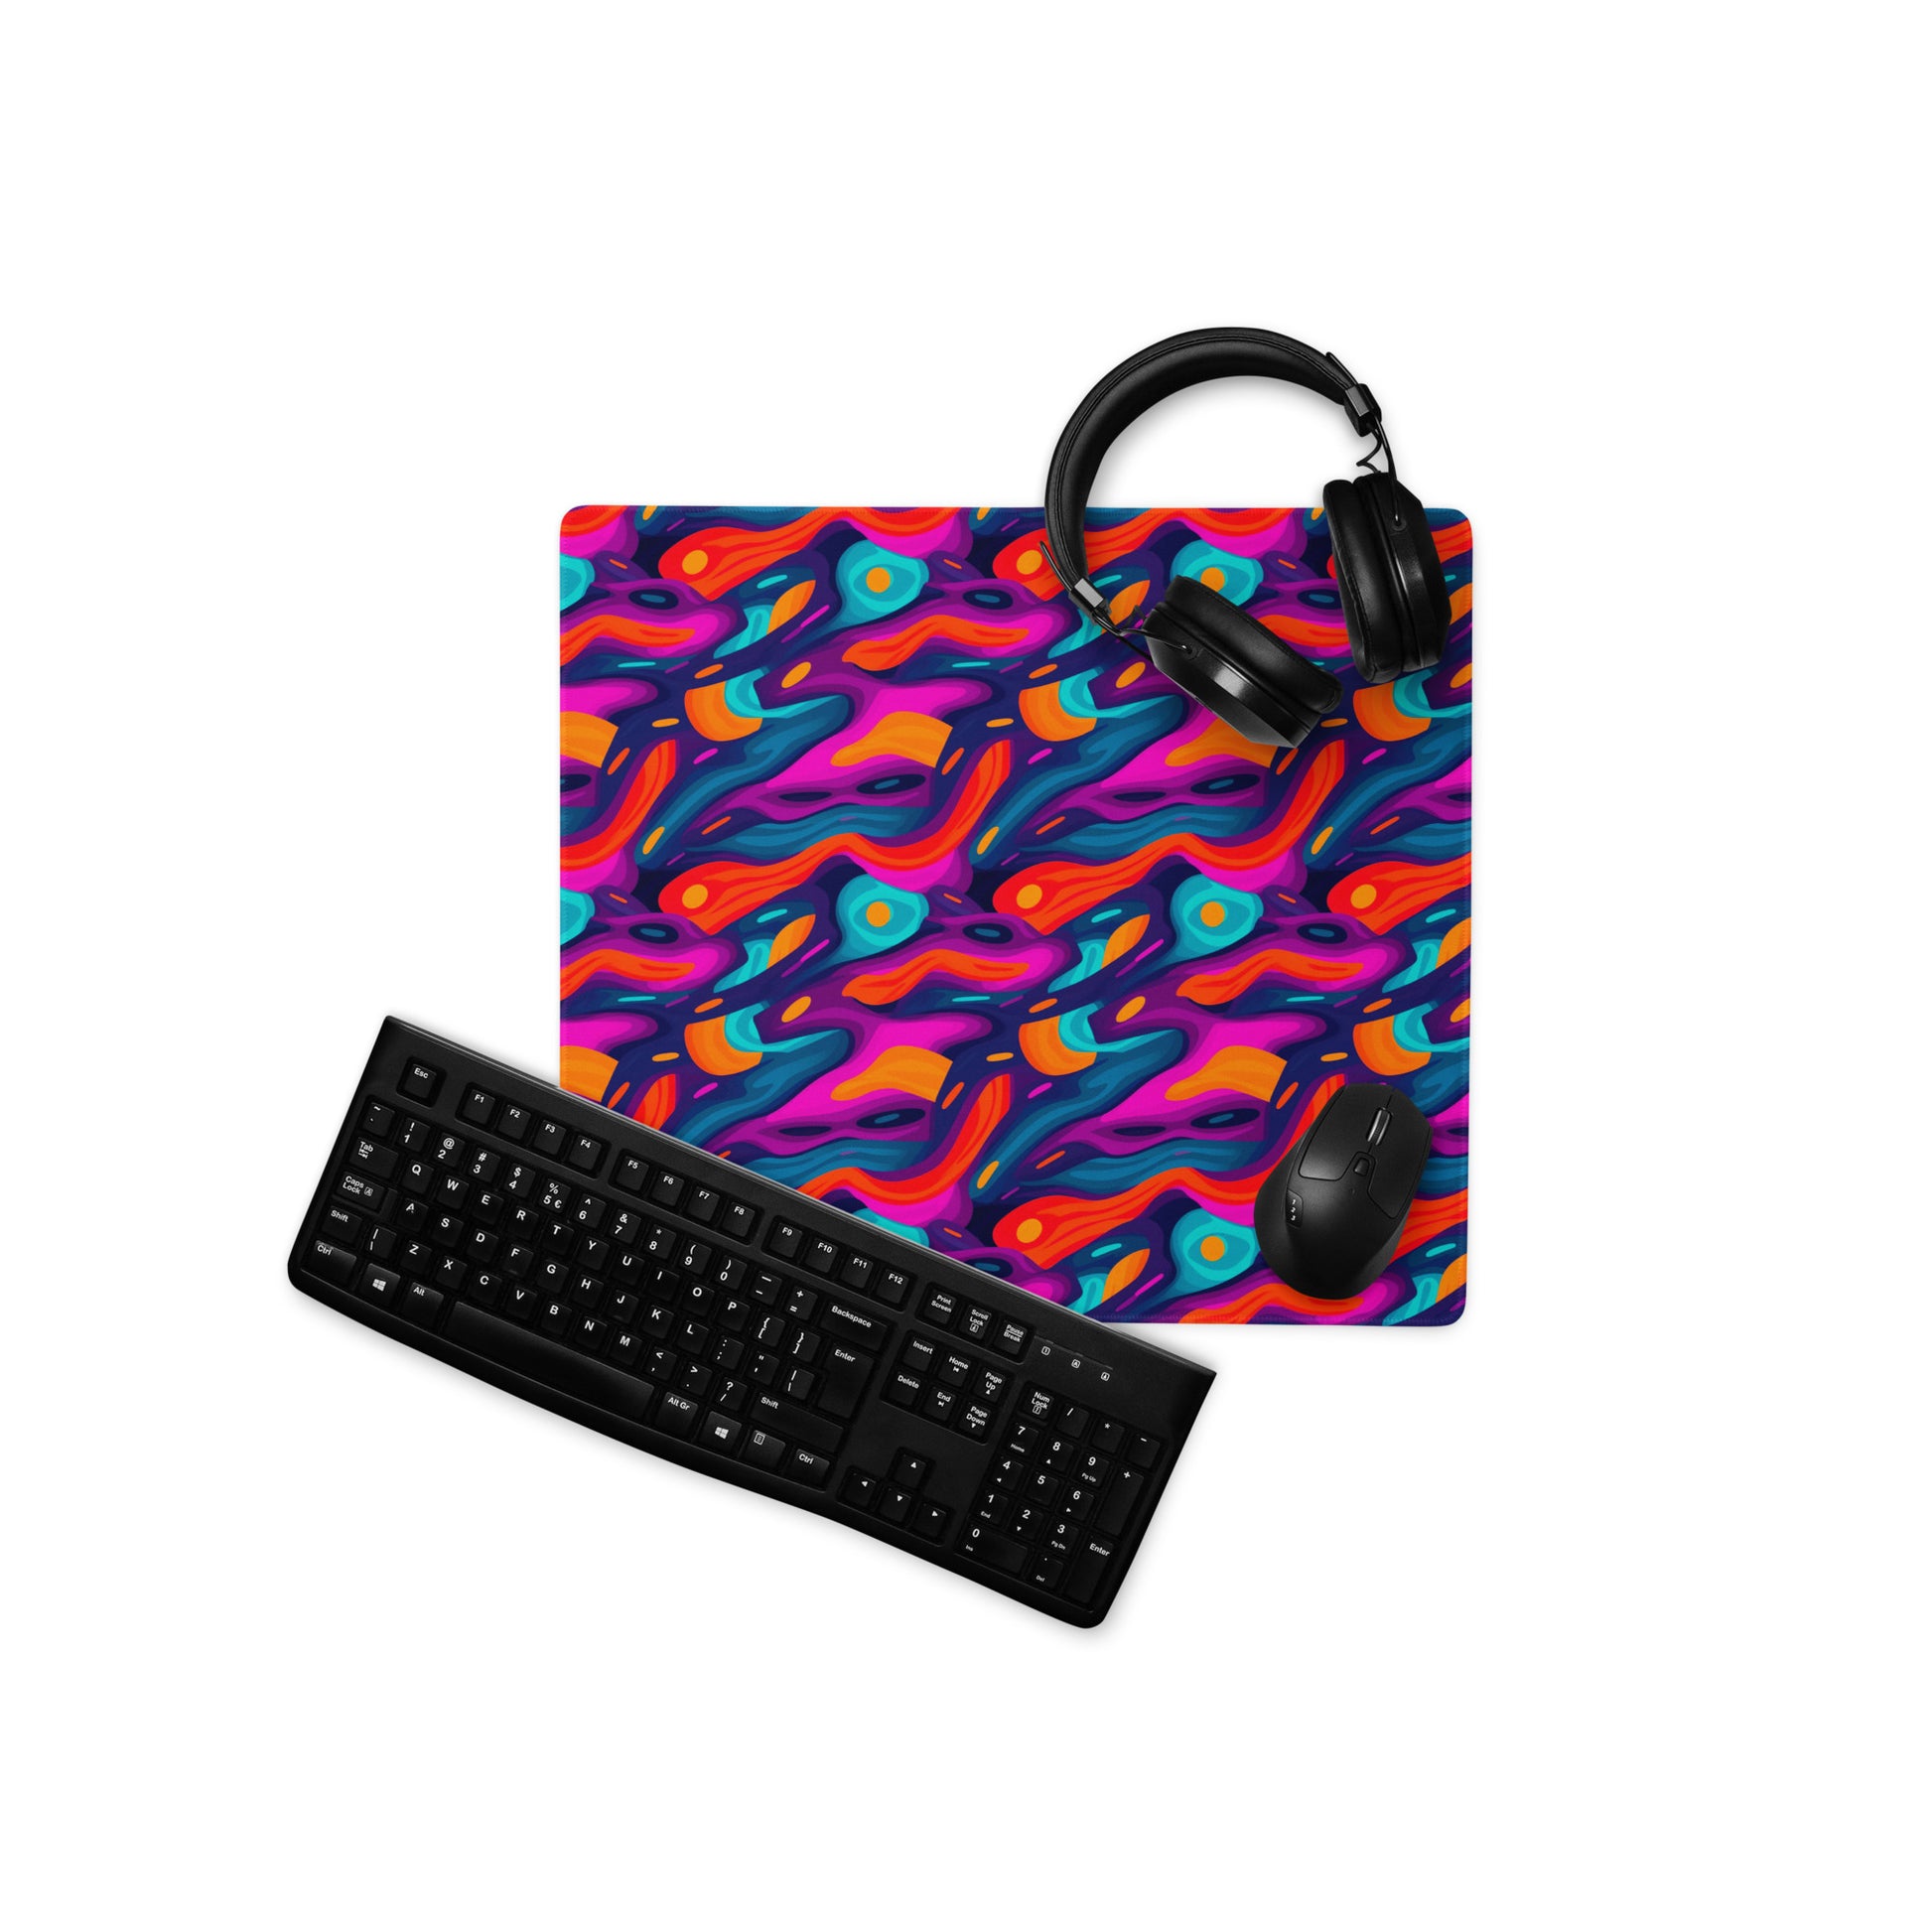 A 18" x 16" desk pad with a wavy abstract pattern on it displayed with a keyboard, headphones and a mouse. Blue, Purple and Red in color.